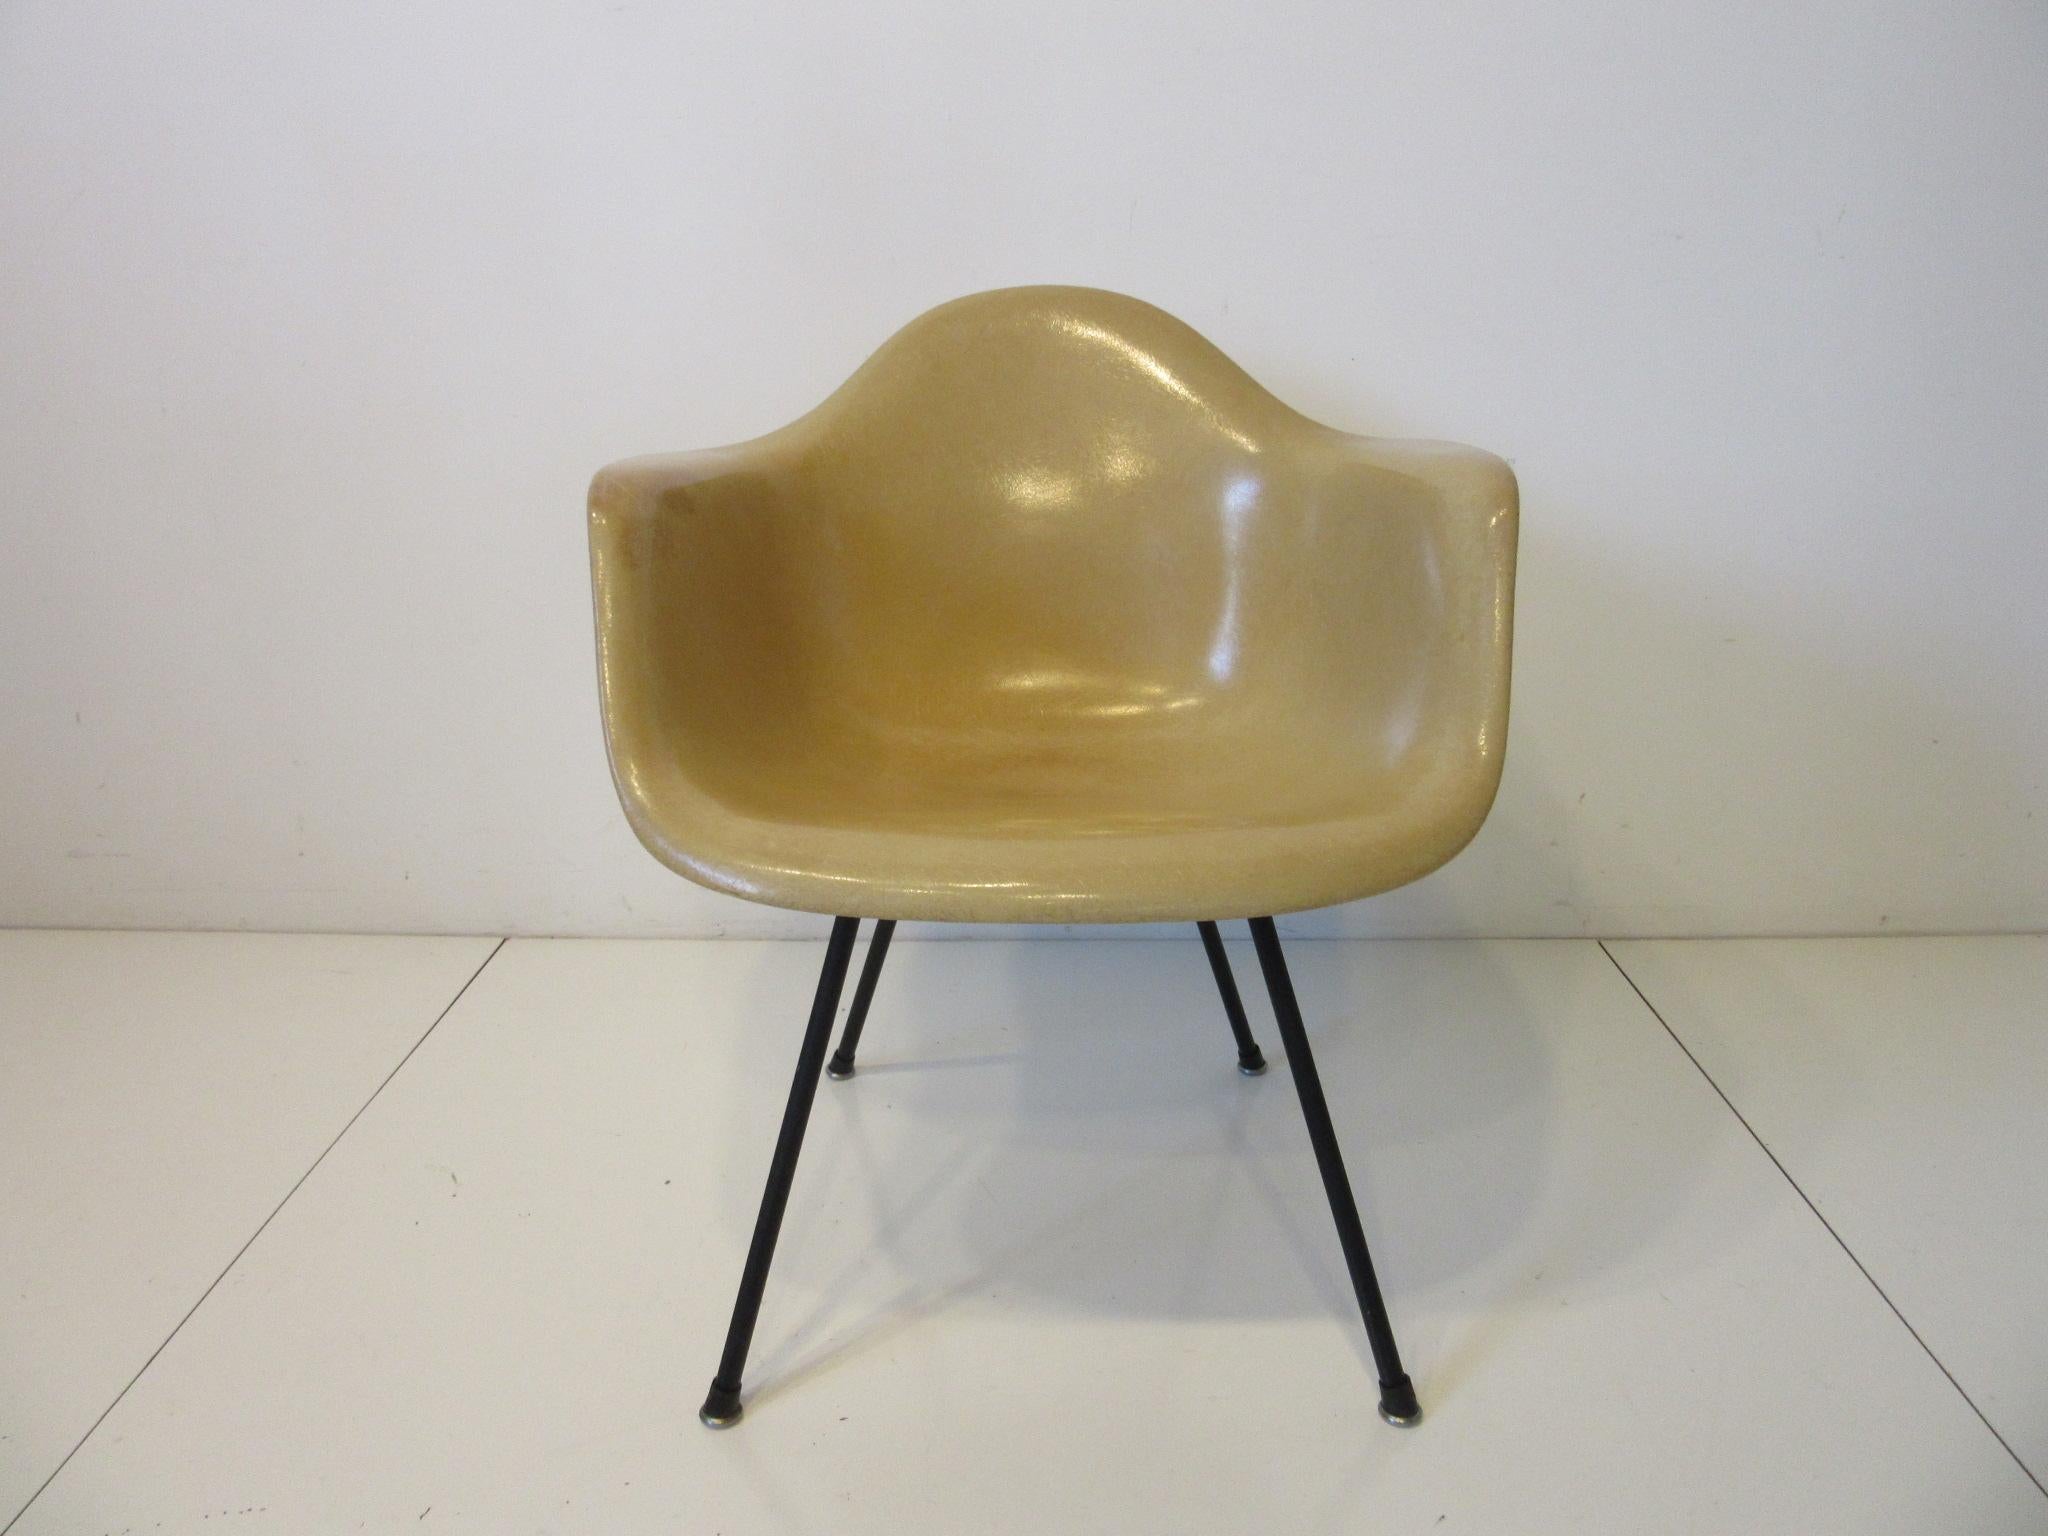 An early second generation Eames fiberglass arm shell chair with the large shock mounts, washers and a cast iron X-base in the rare lower lounge height. Manufactured by the Herman Miller Furniture company.